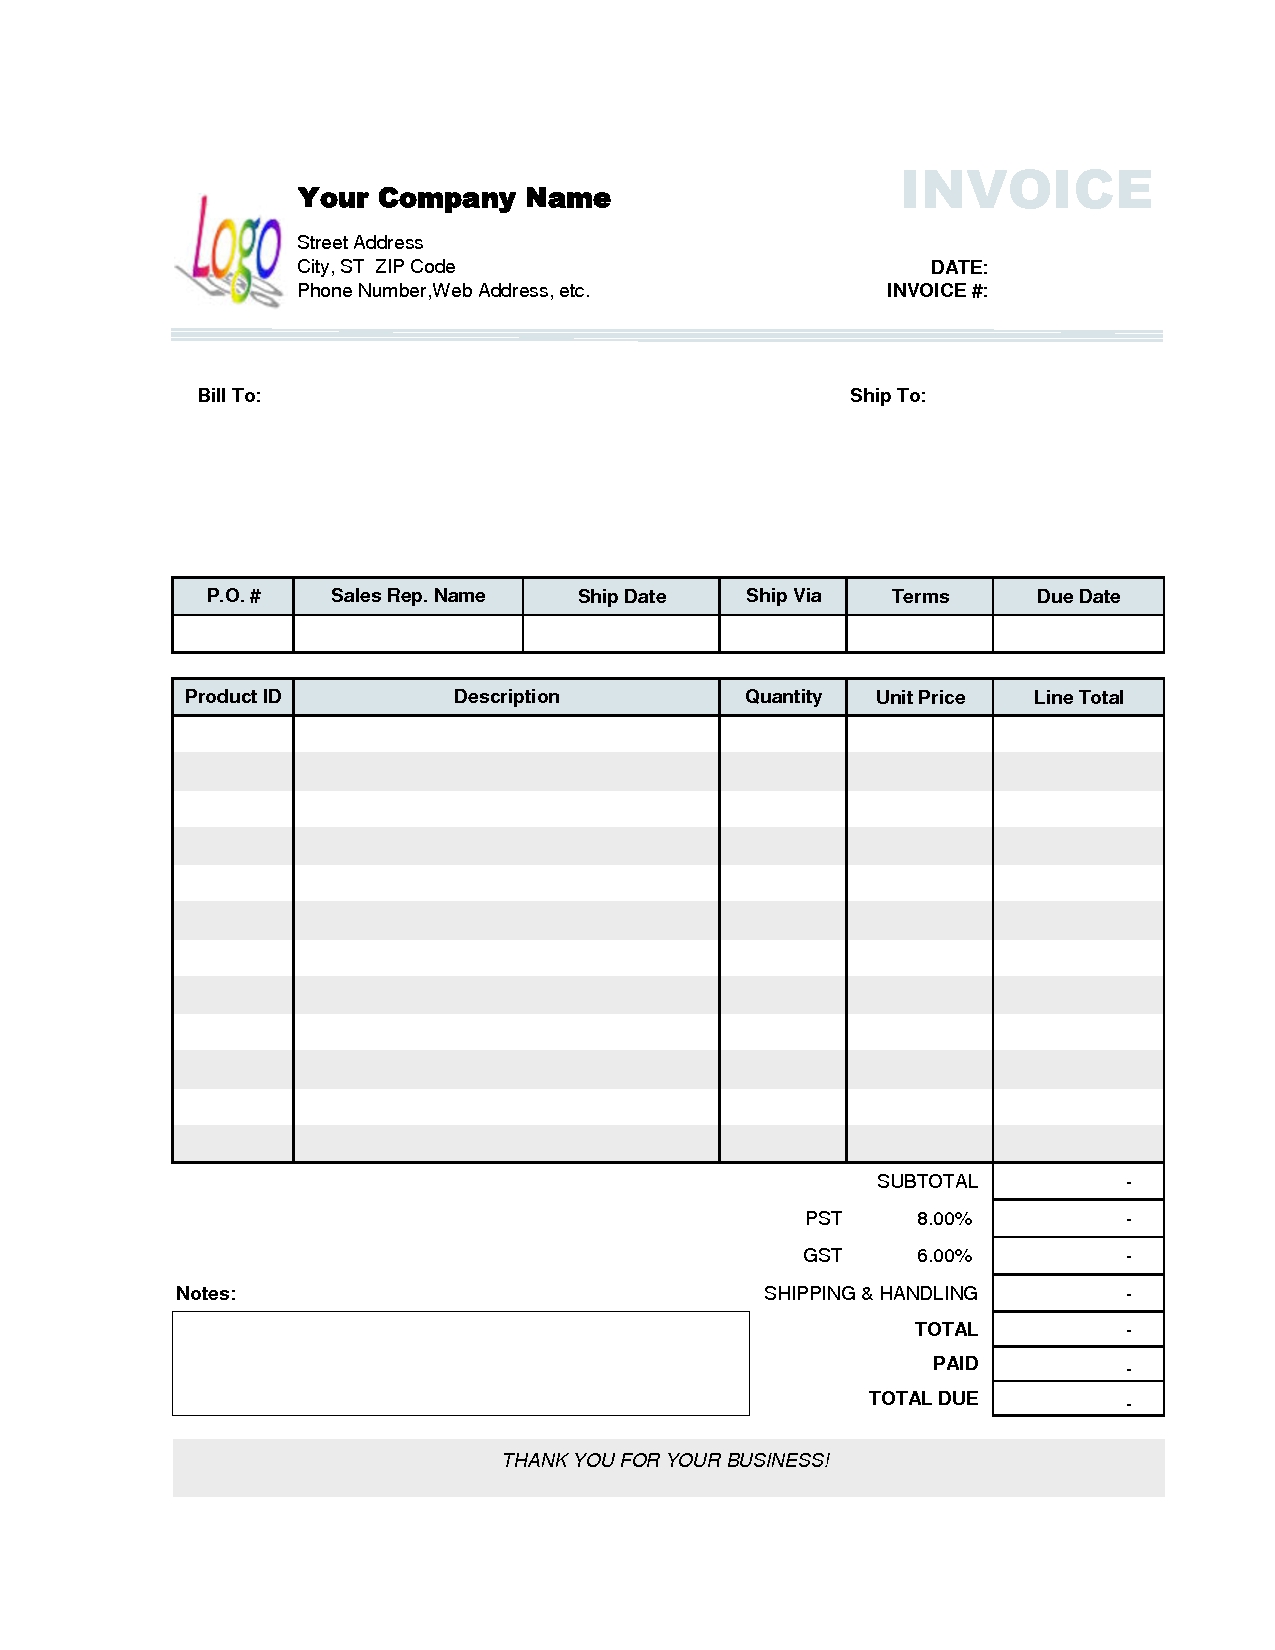 9 printable invoice templates samples and problems of invoicing printable invoices online